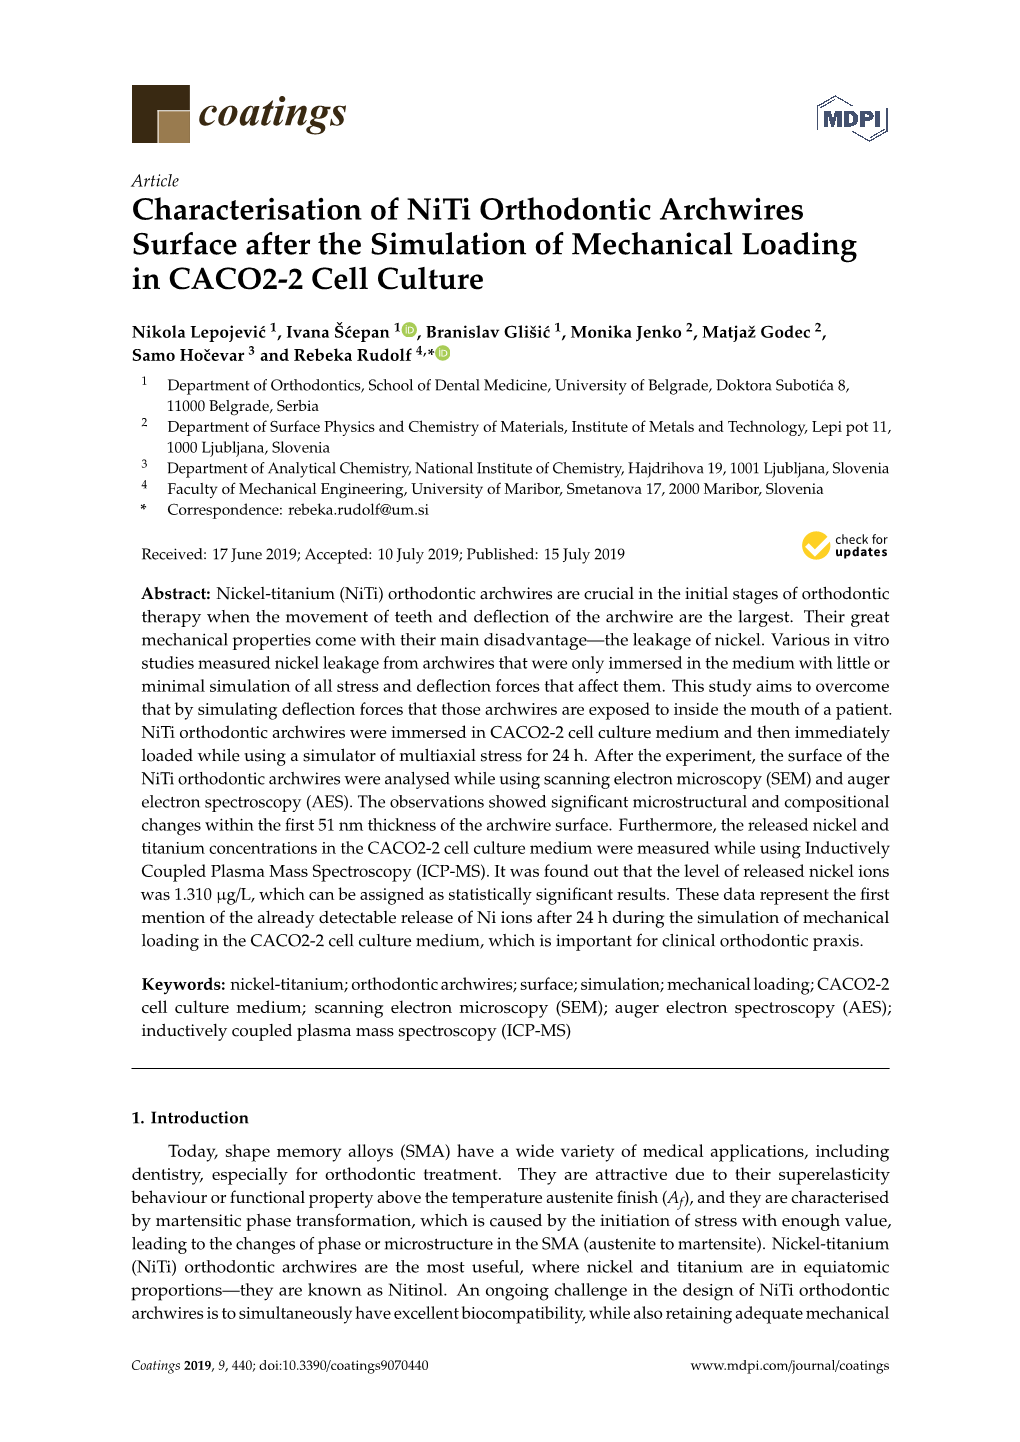 Characterisation of Niti Orthodontic Archwires Surface After the Simulation of Mechanical Loading in CACO2-2 Cell Culture